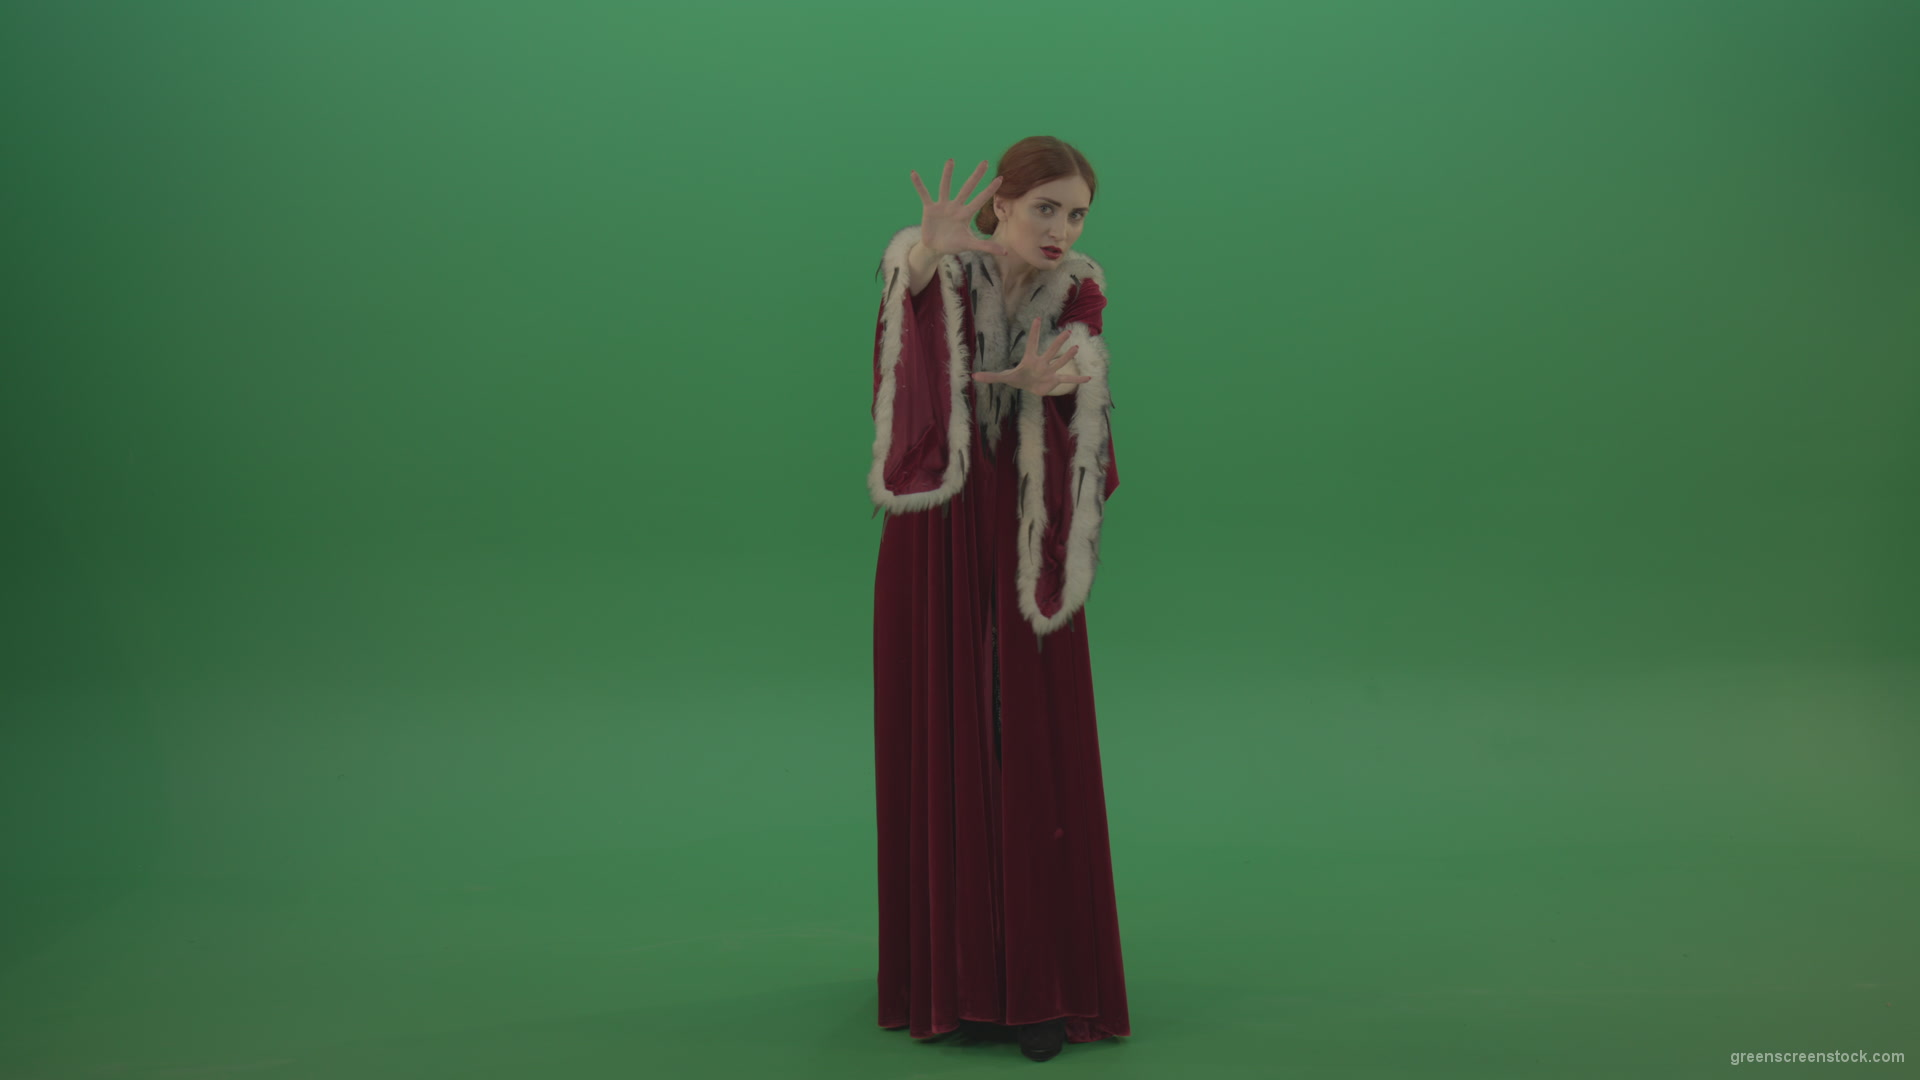 Witch-holds-back-the-magic-barrier-with-its-wittic-power_006 Green Screen Stock